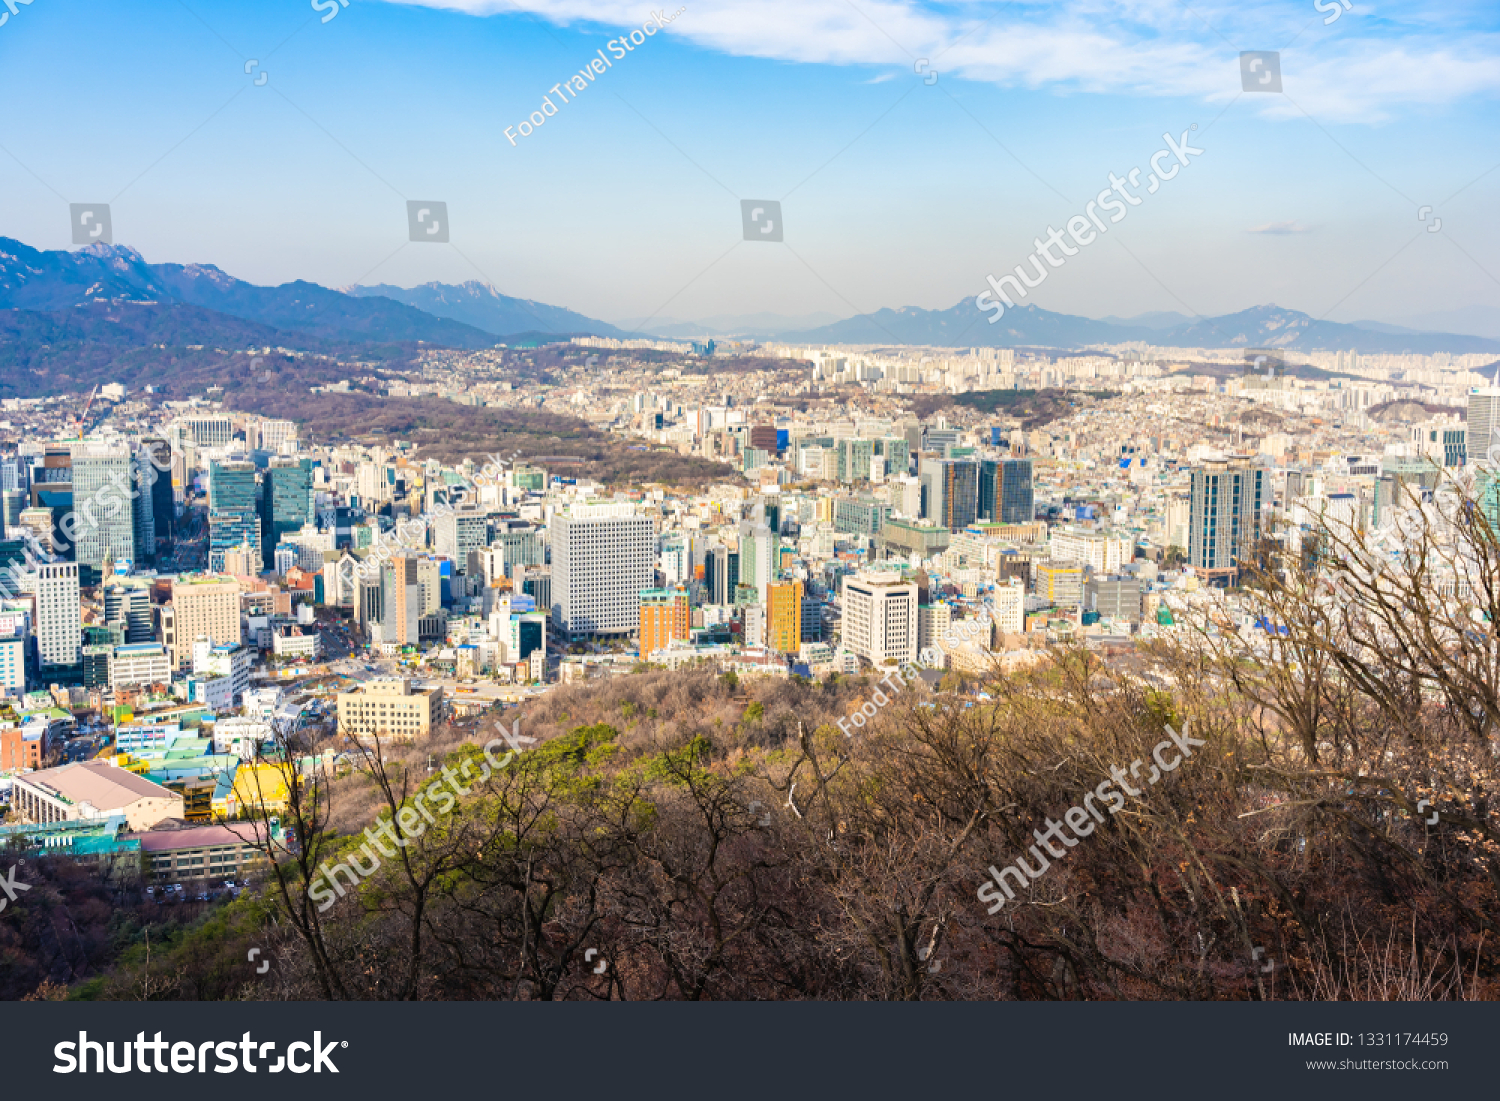 Beautiful landscape and cityscape with architecture and building in Seoul city South Korea #1331174459